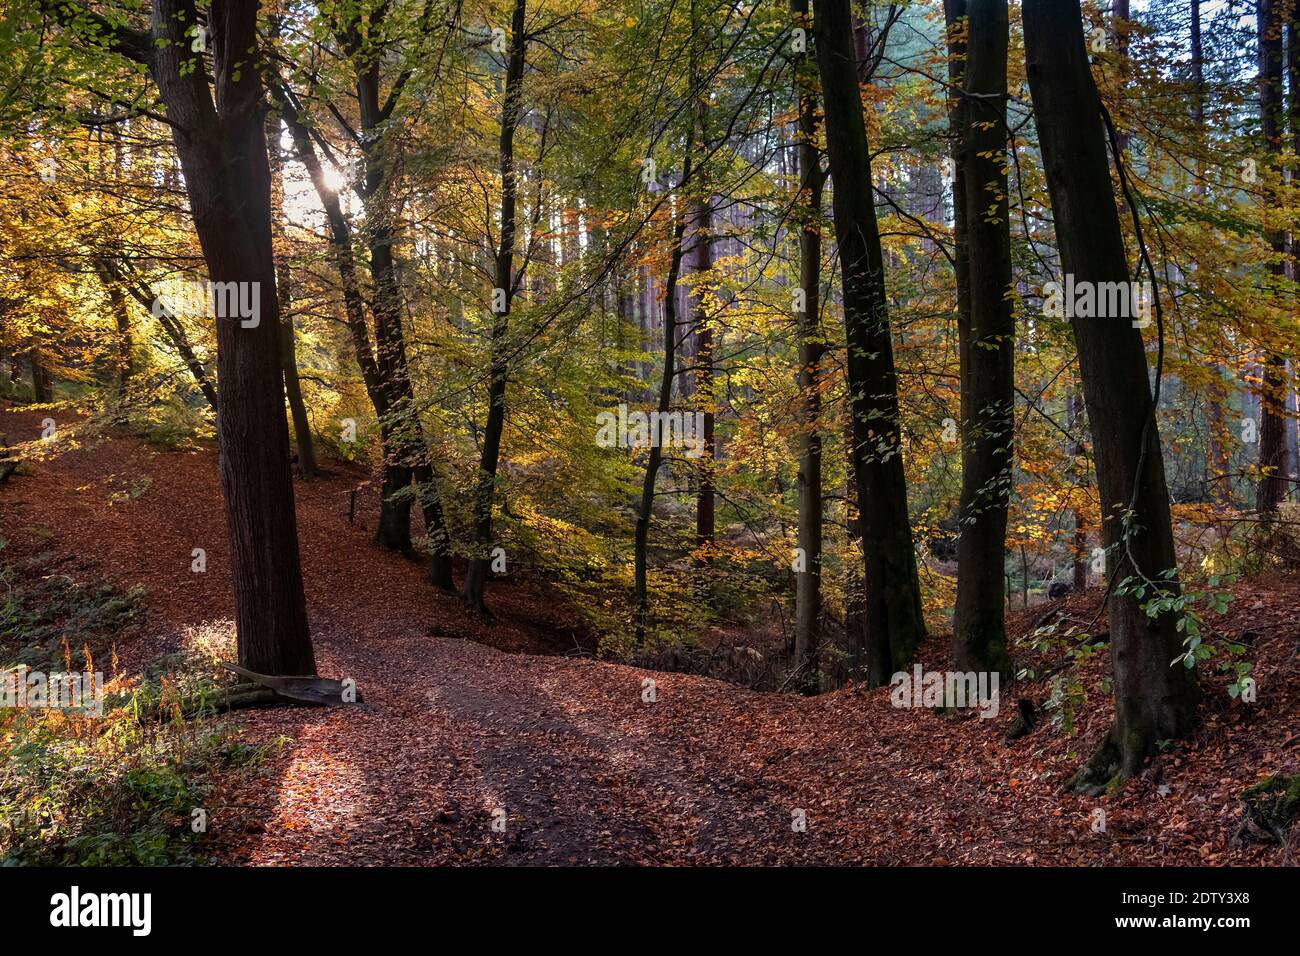 Delamere Forest in autumn, Delamere, Cheshire, England, UK Stock Photo